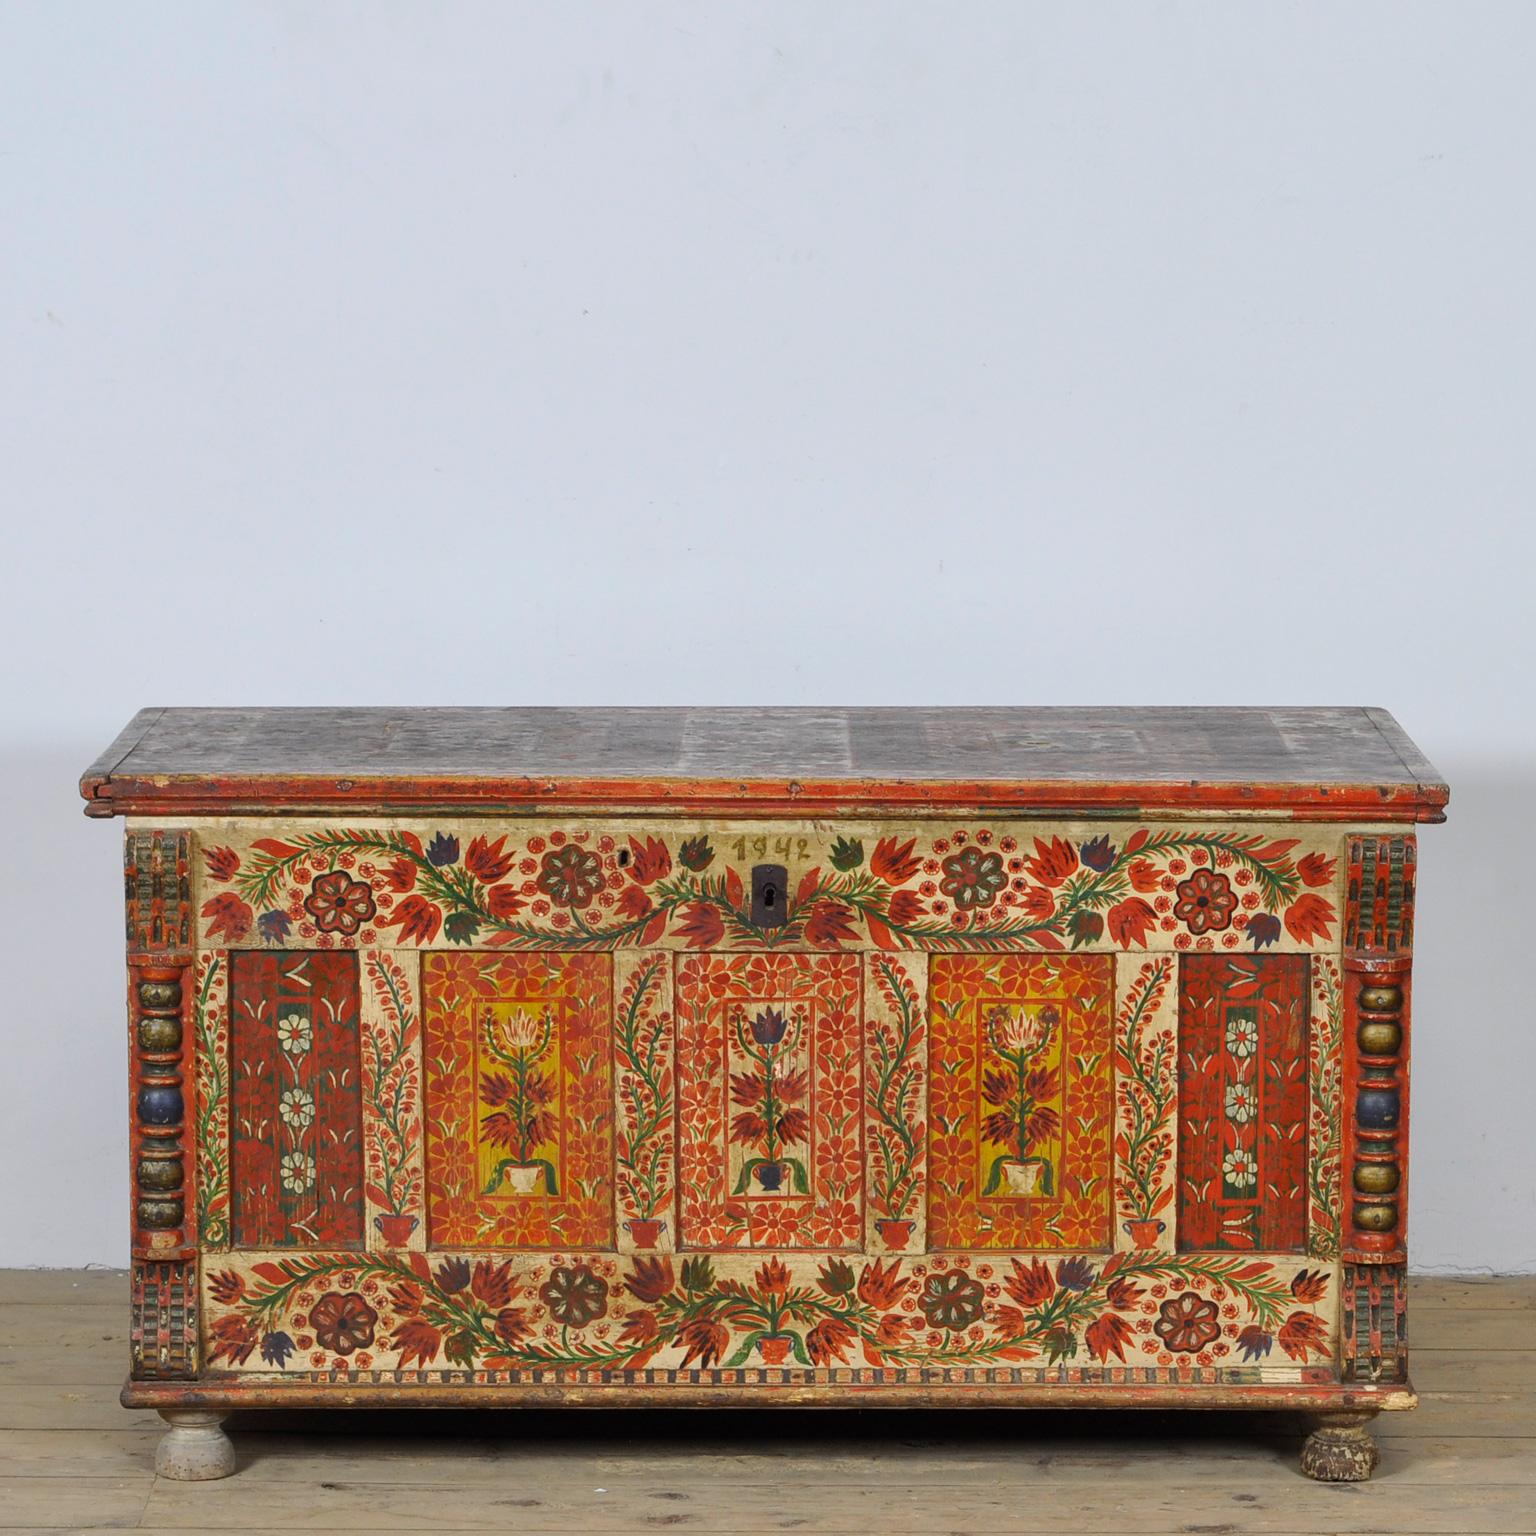 A beautiful example of a wedding chest from the Hungarian tribes of the Kalota, the illustrations are traditional with images of flowers and tulips. The chest was part of a dowry package and would be kept in the clean room of the house with the